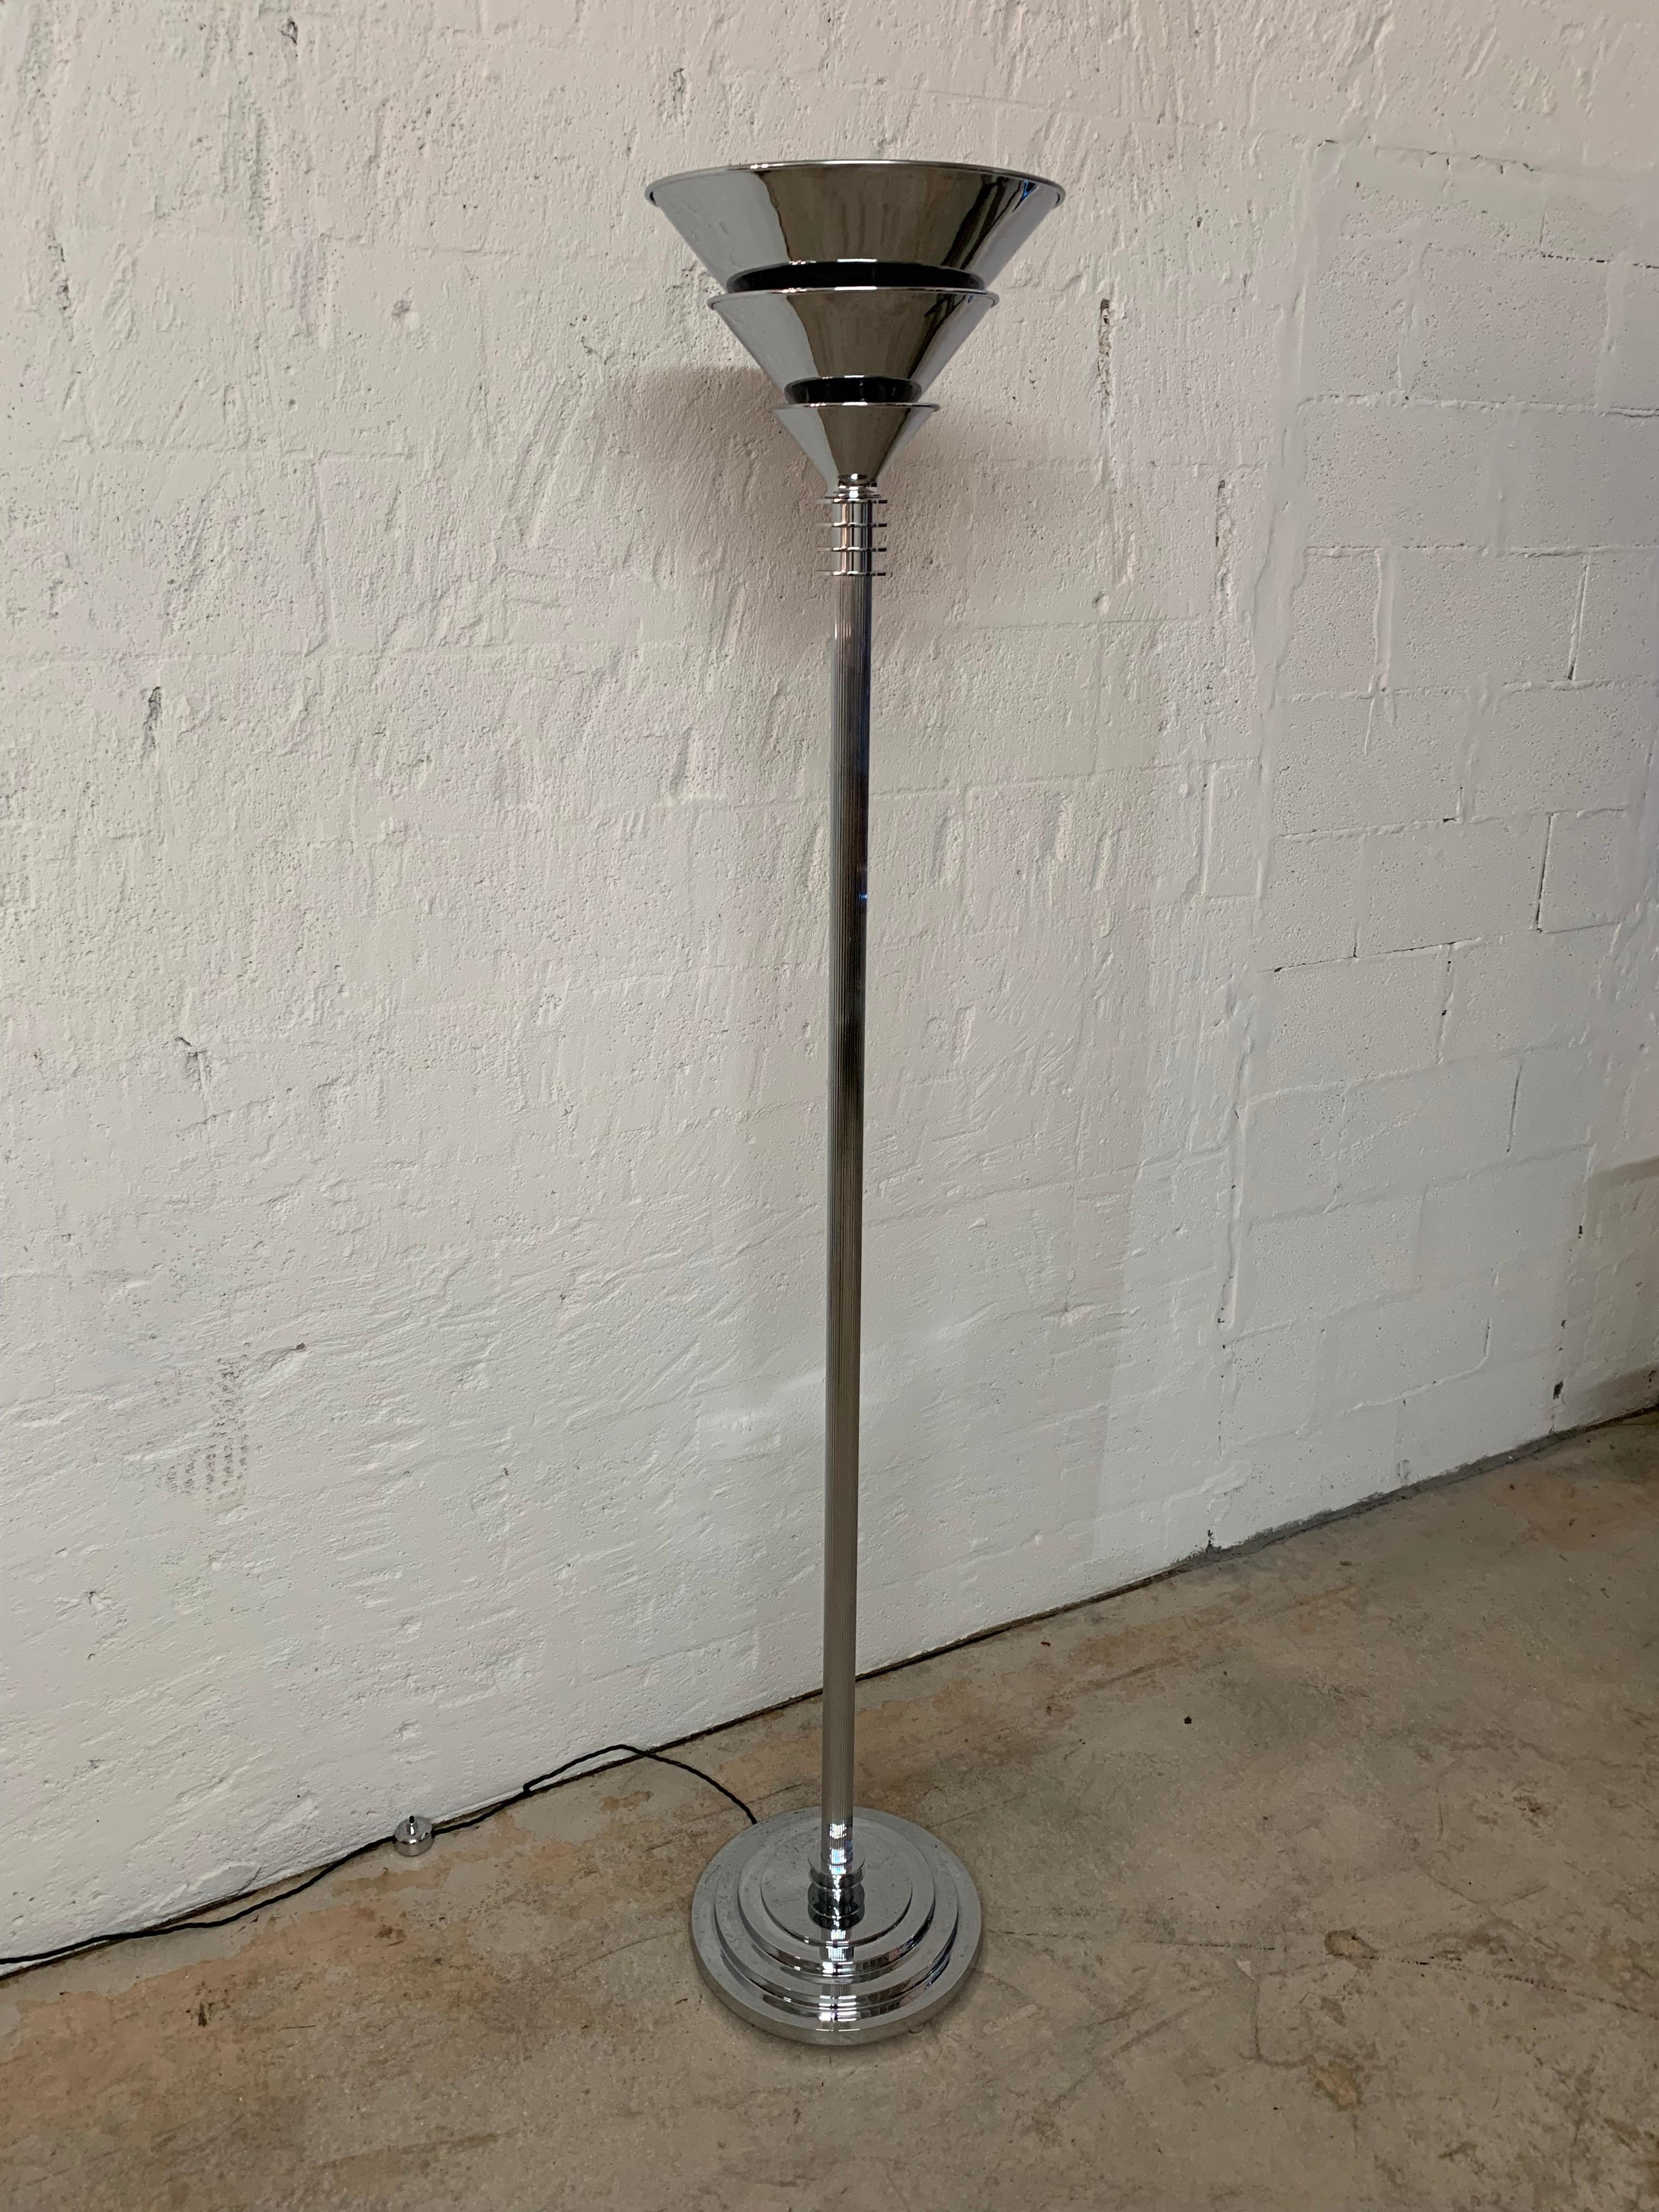 Plated Art Deco Polished Chrome over Steel Torchiere or Floor Lamp, Jean Perzel Style